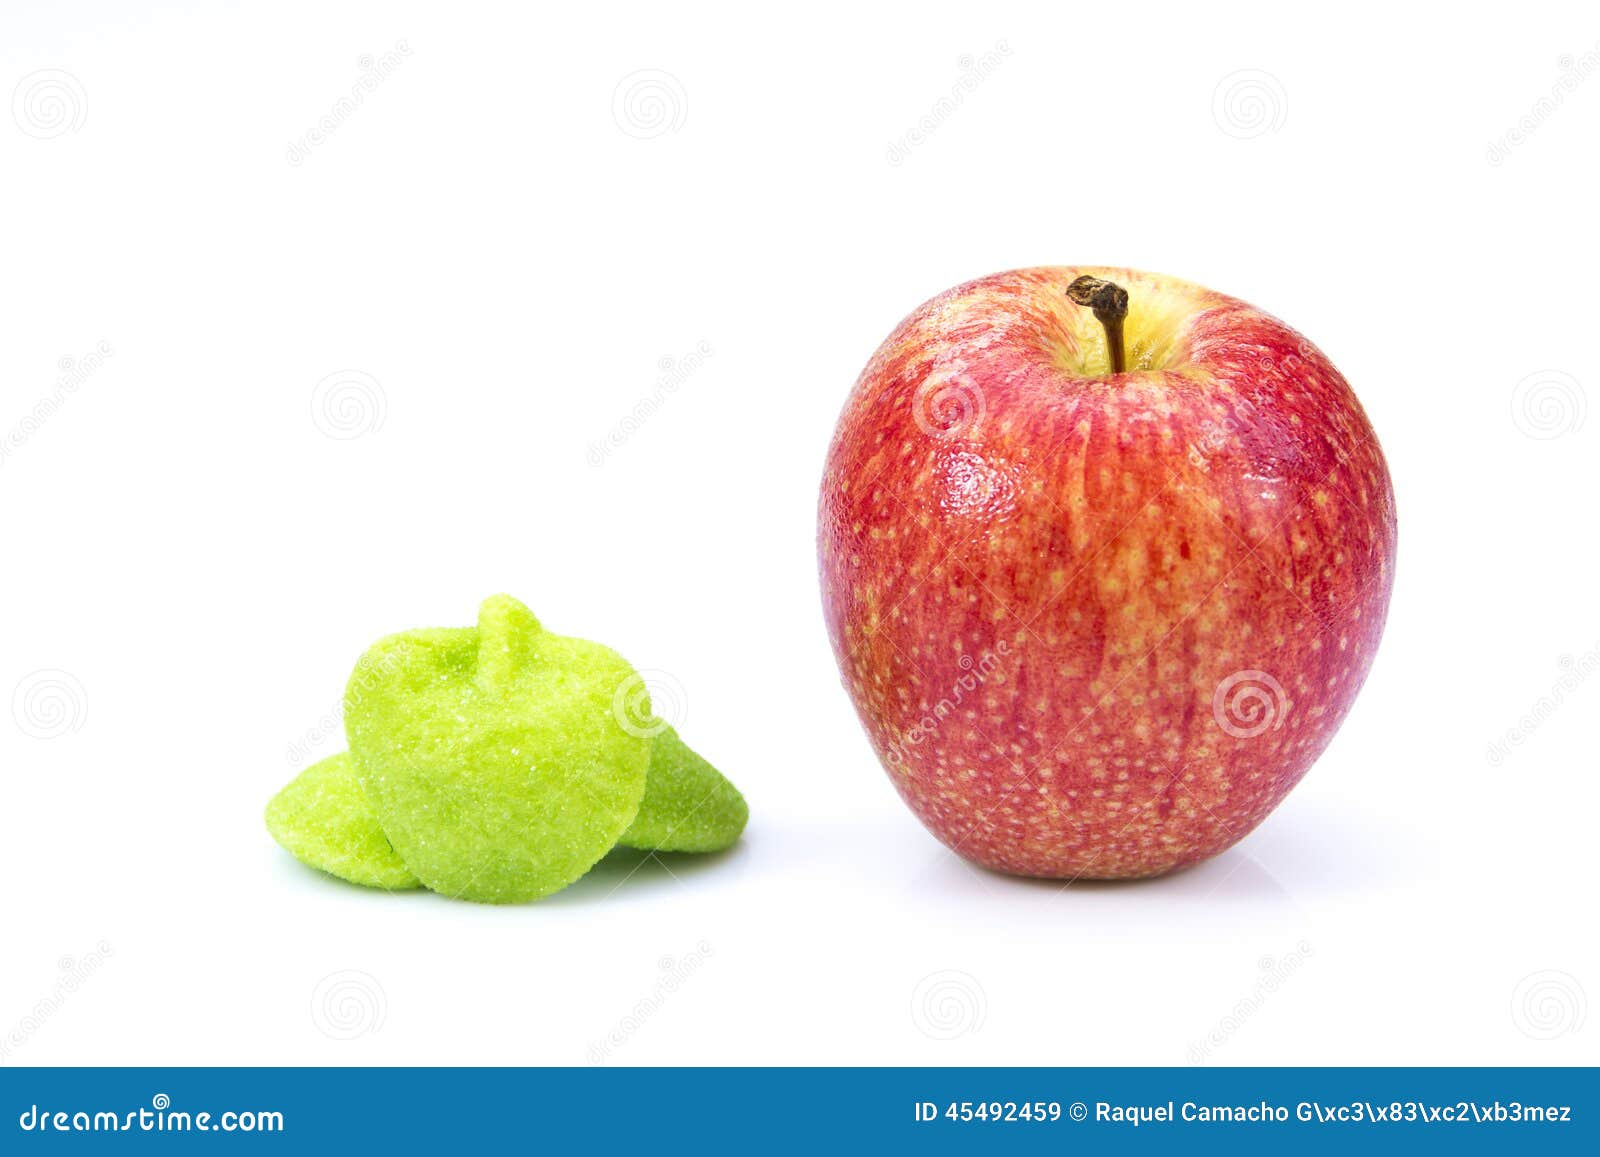 Healthy and Unhealthy Apples Stock Image - Image of people, calorie:  45492459